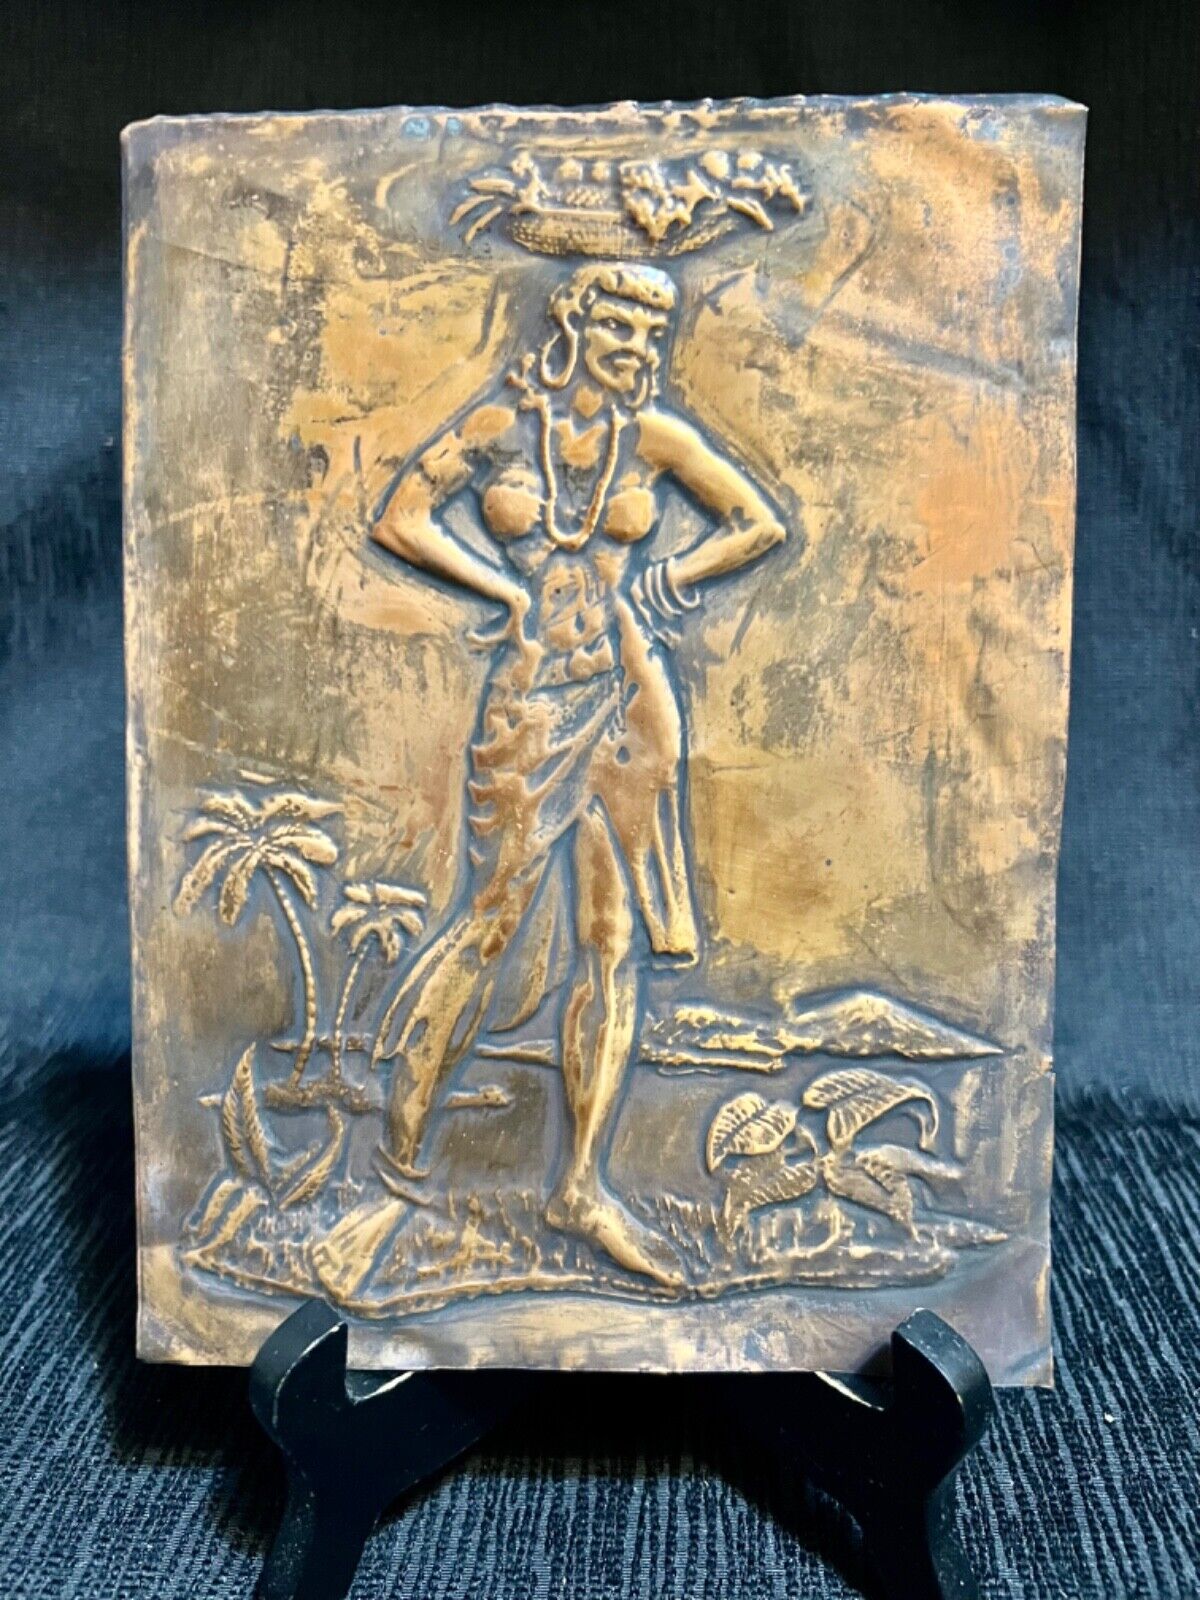 Vtg 1960s Hammered Copper Haitian Female Dancer Picture Small 8x6 Unmounted